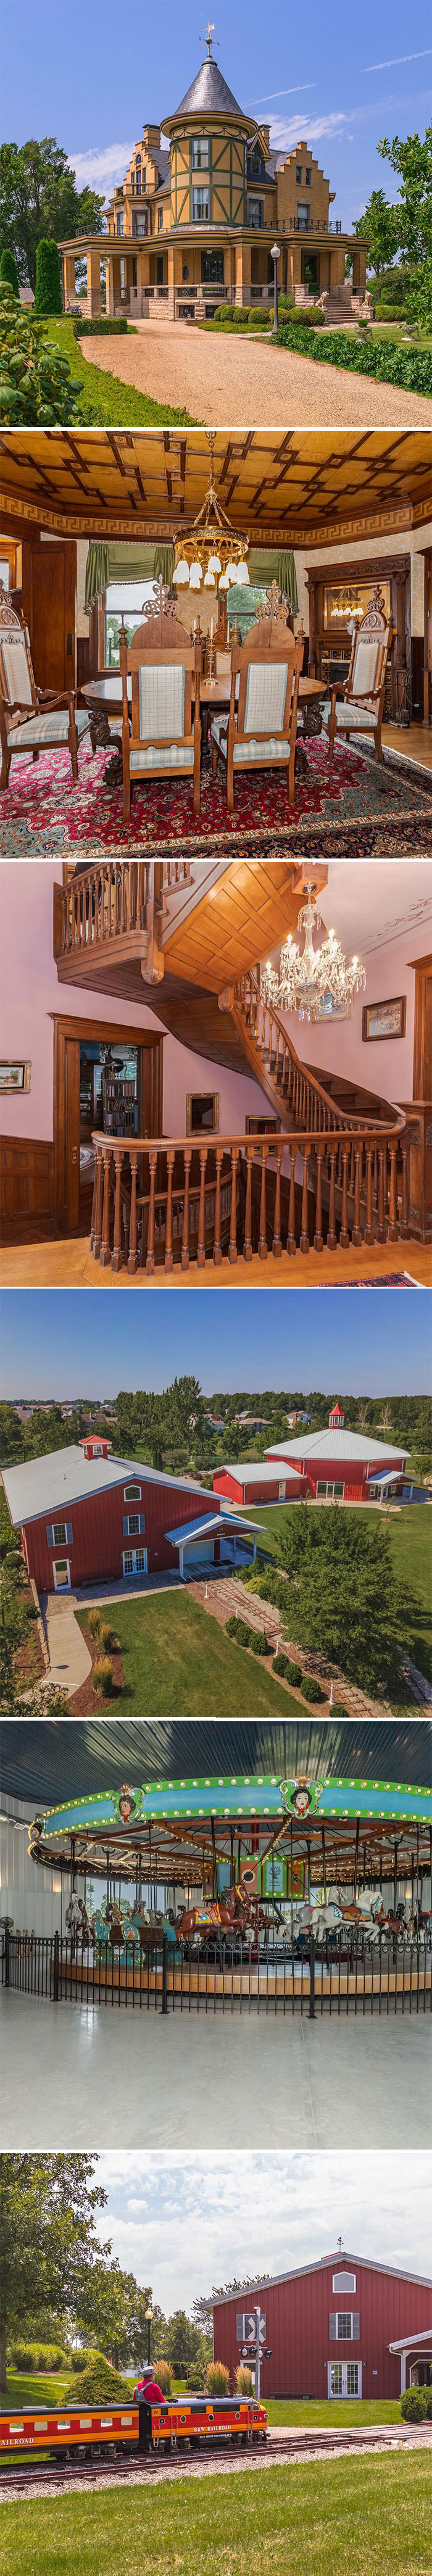 I’m Not Saying This 1898 Victorian Is My Most Favorite Zillow Gone Wild House Ever But This Is My Most Favorite Zillow Gone Wild House Ever And It Comes With A Few Surprises??? $4,500,000